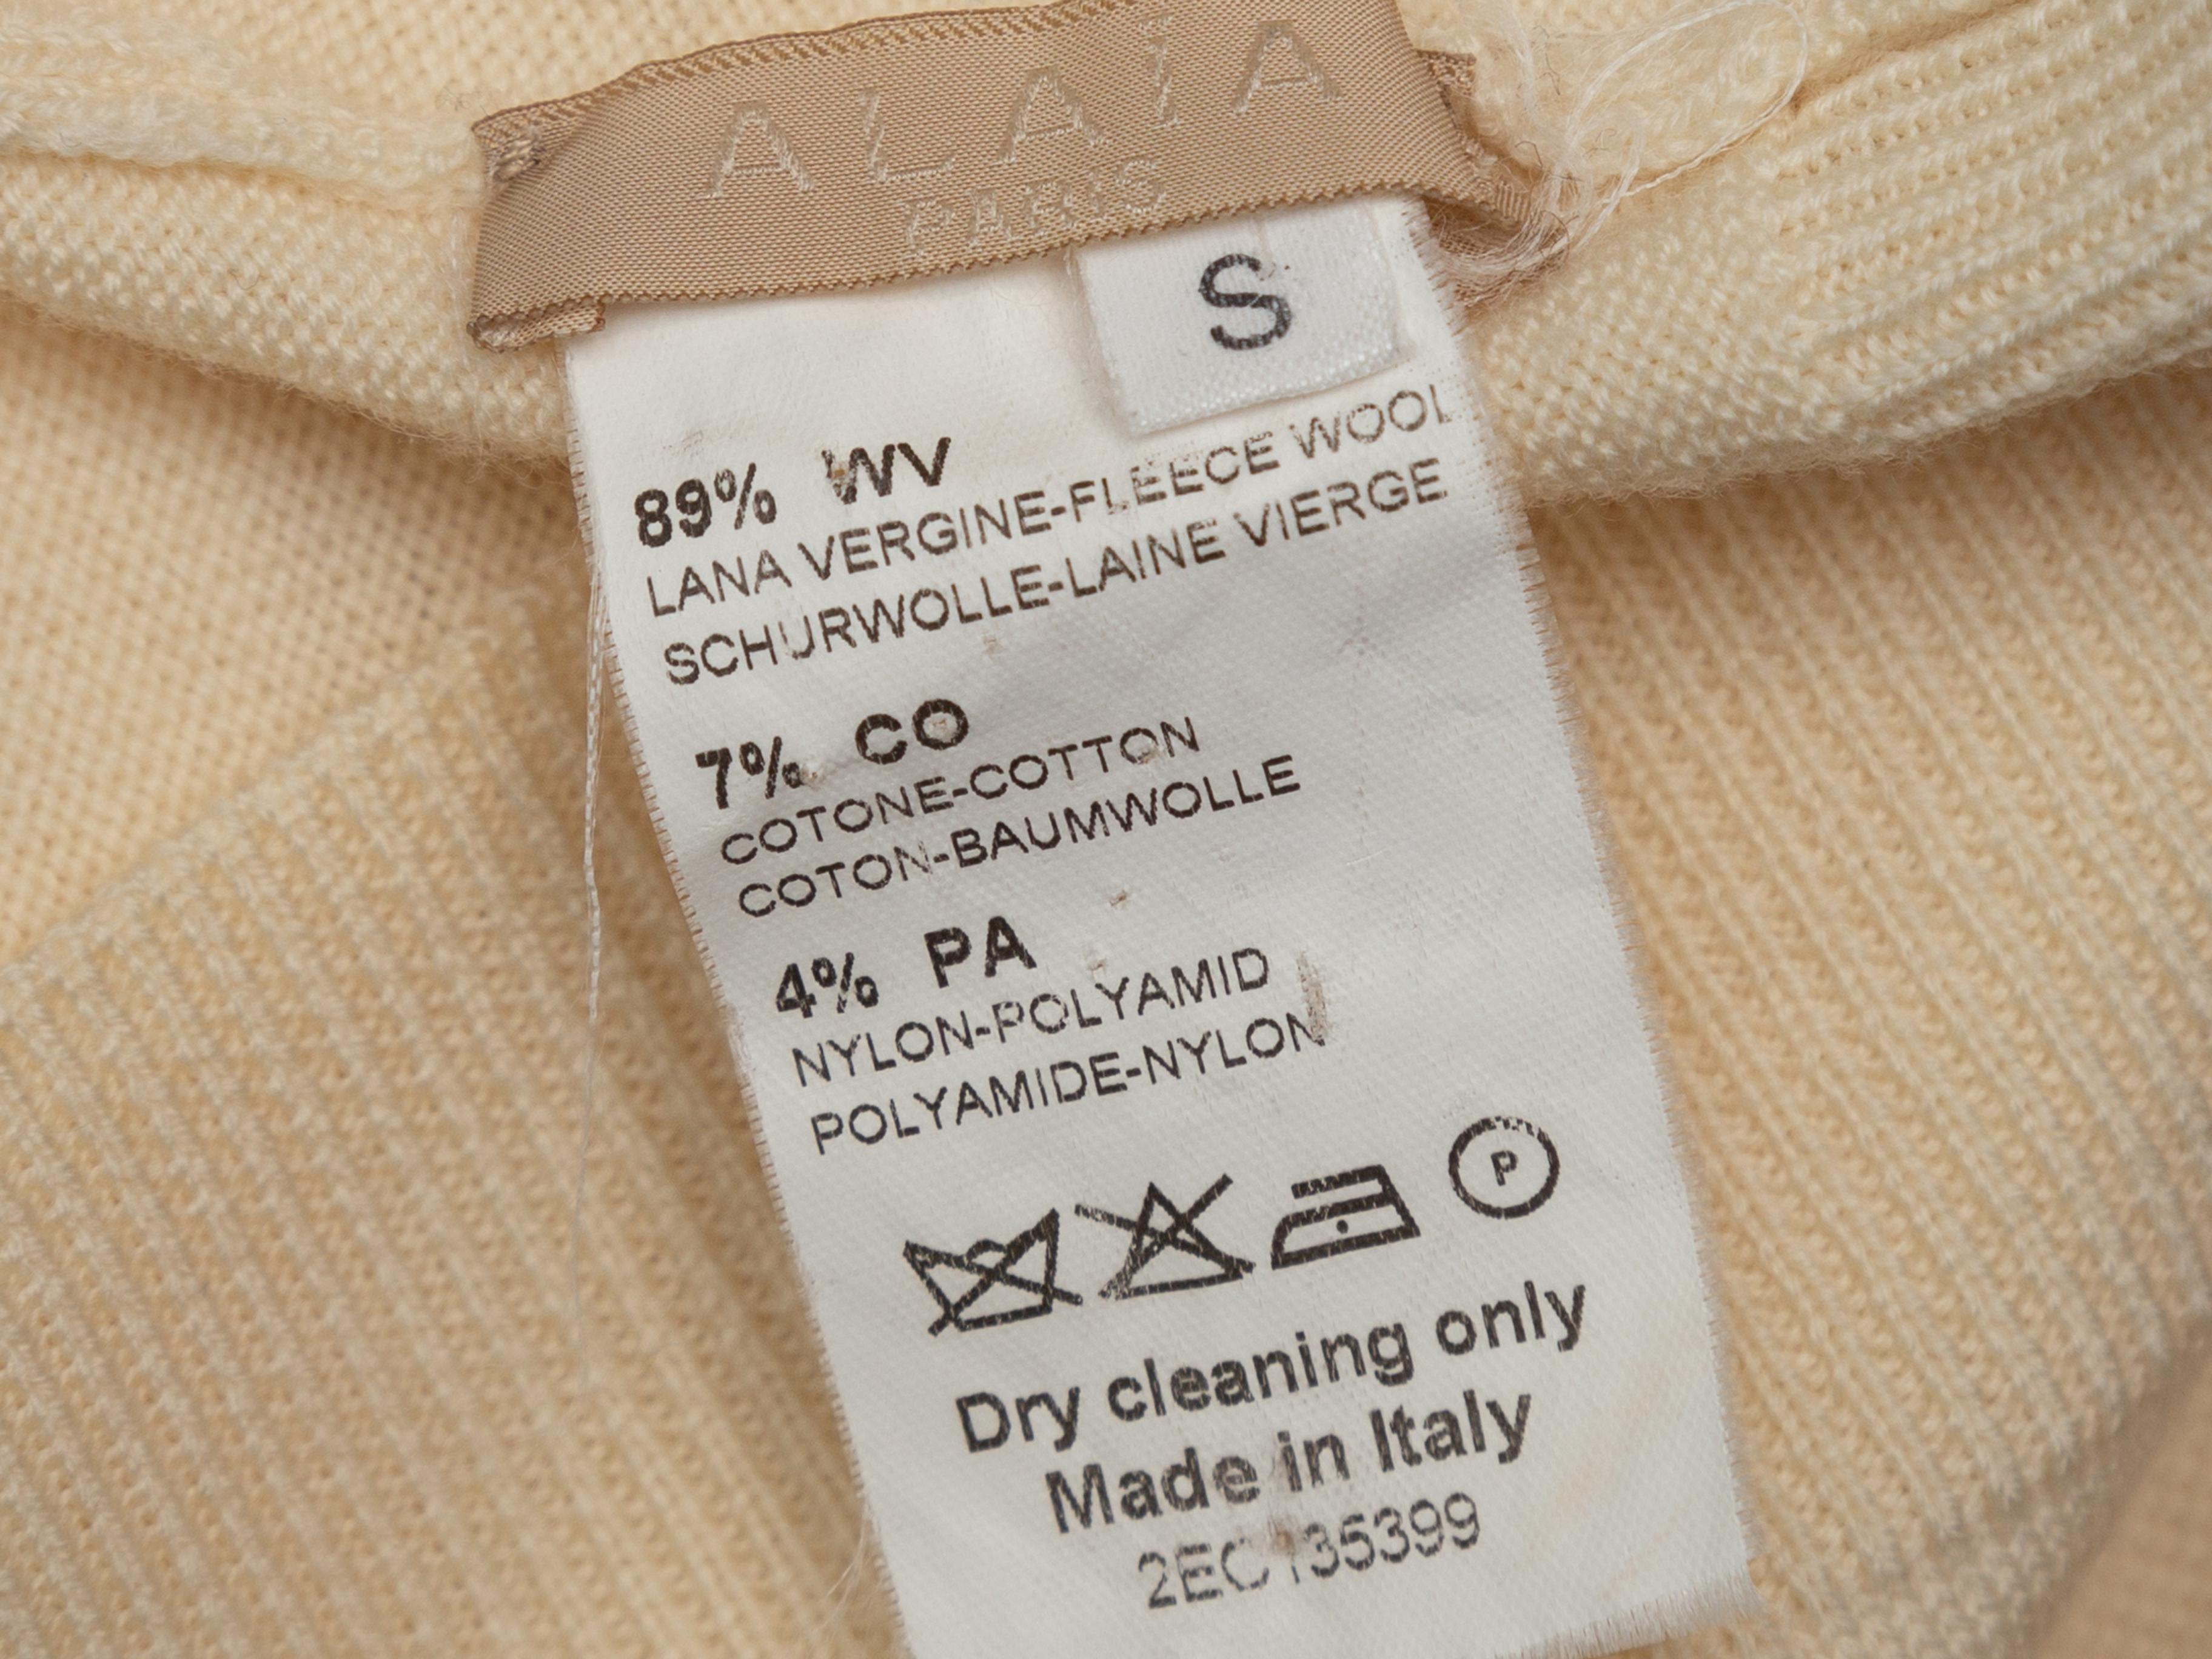 Product details: Cream virgin wool sweater by Alaia. Crew neck. Lace panel accents at bust and sleeves. 32